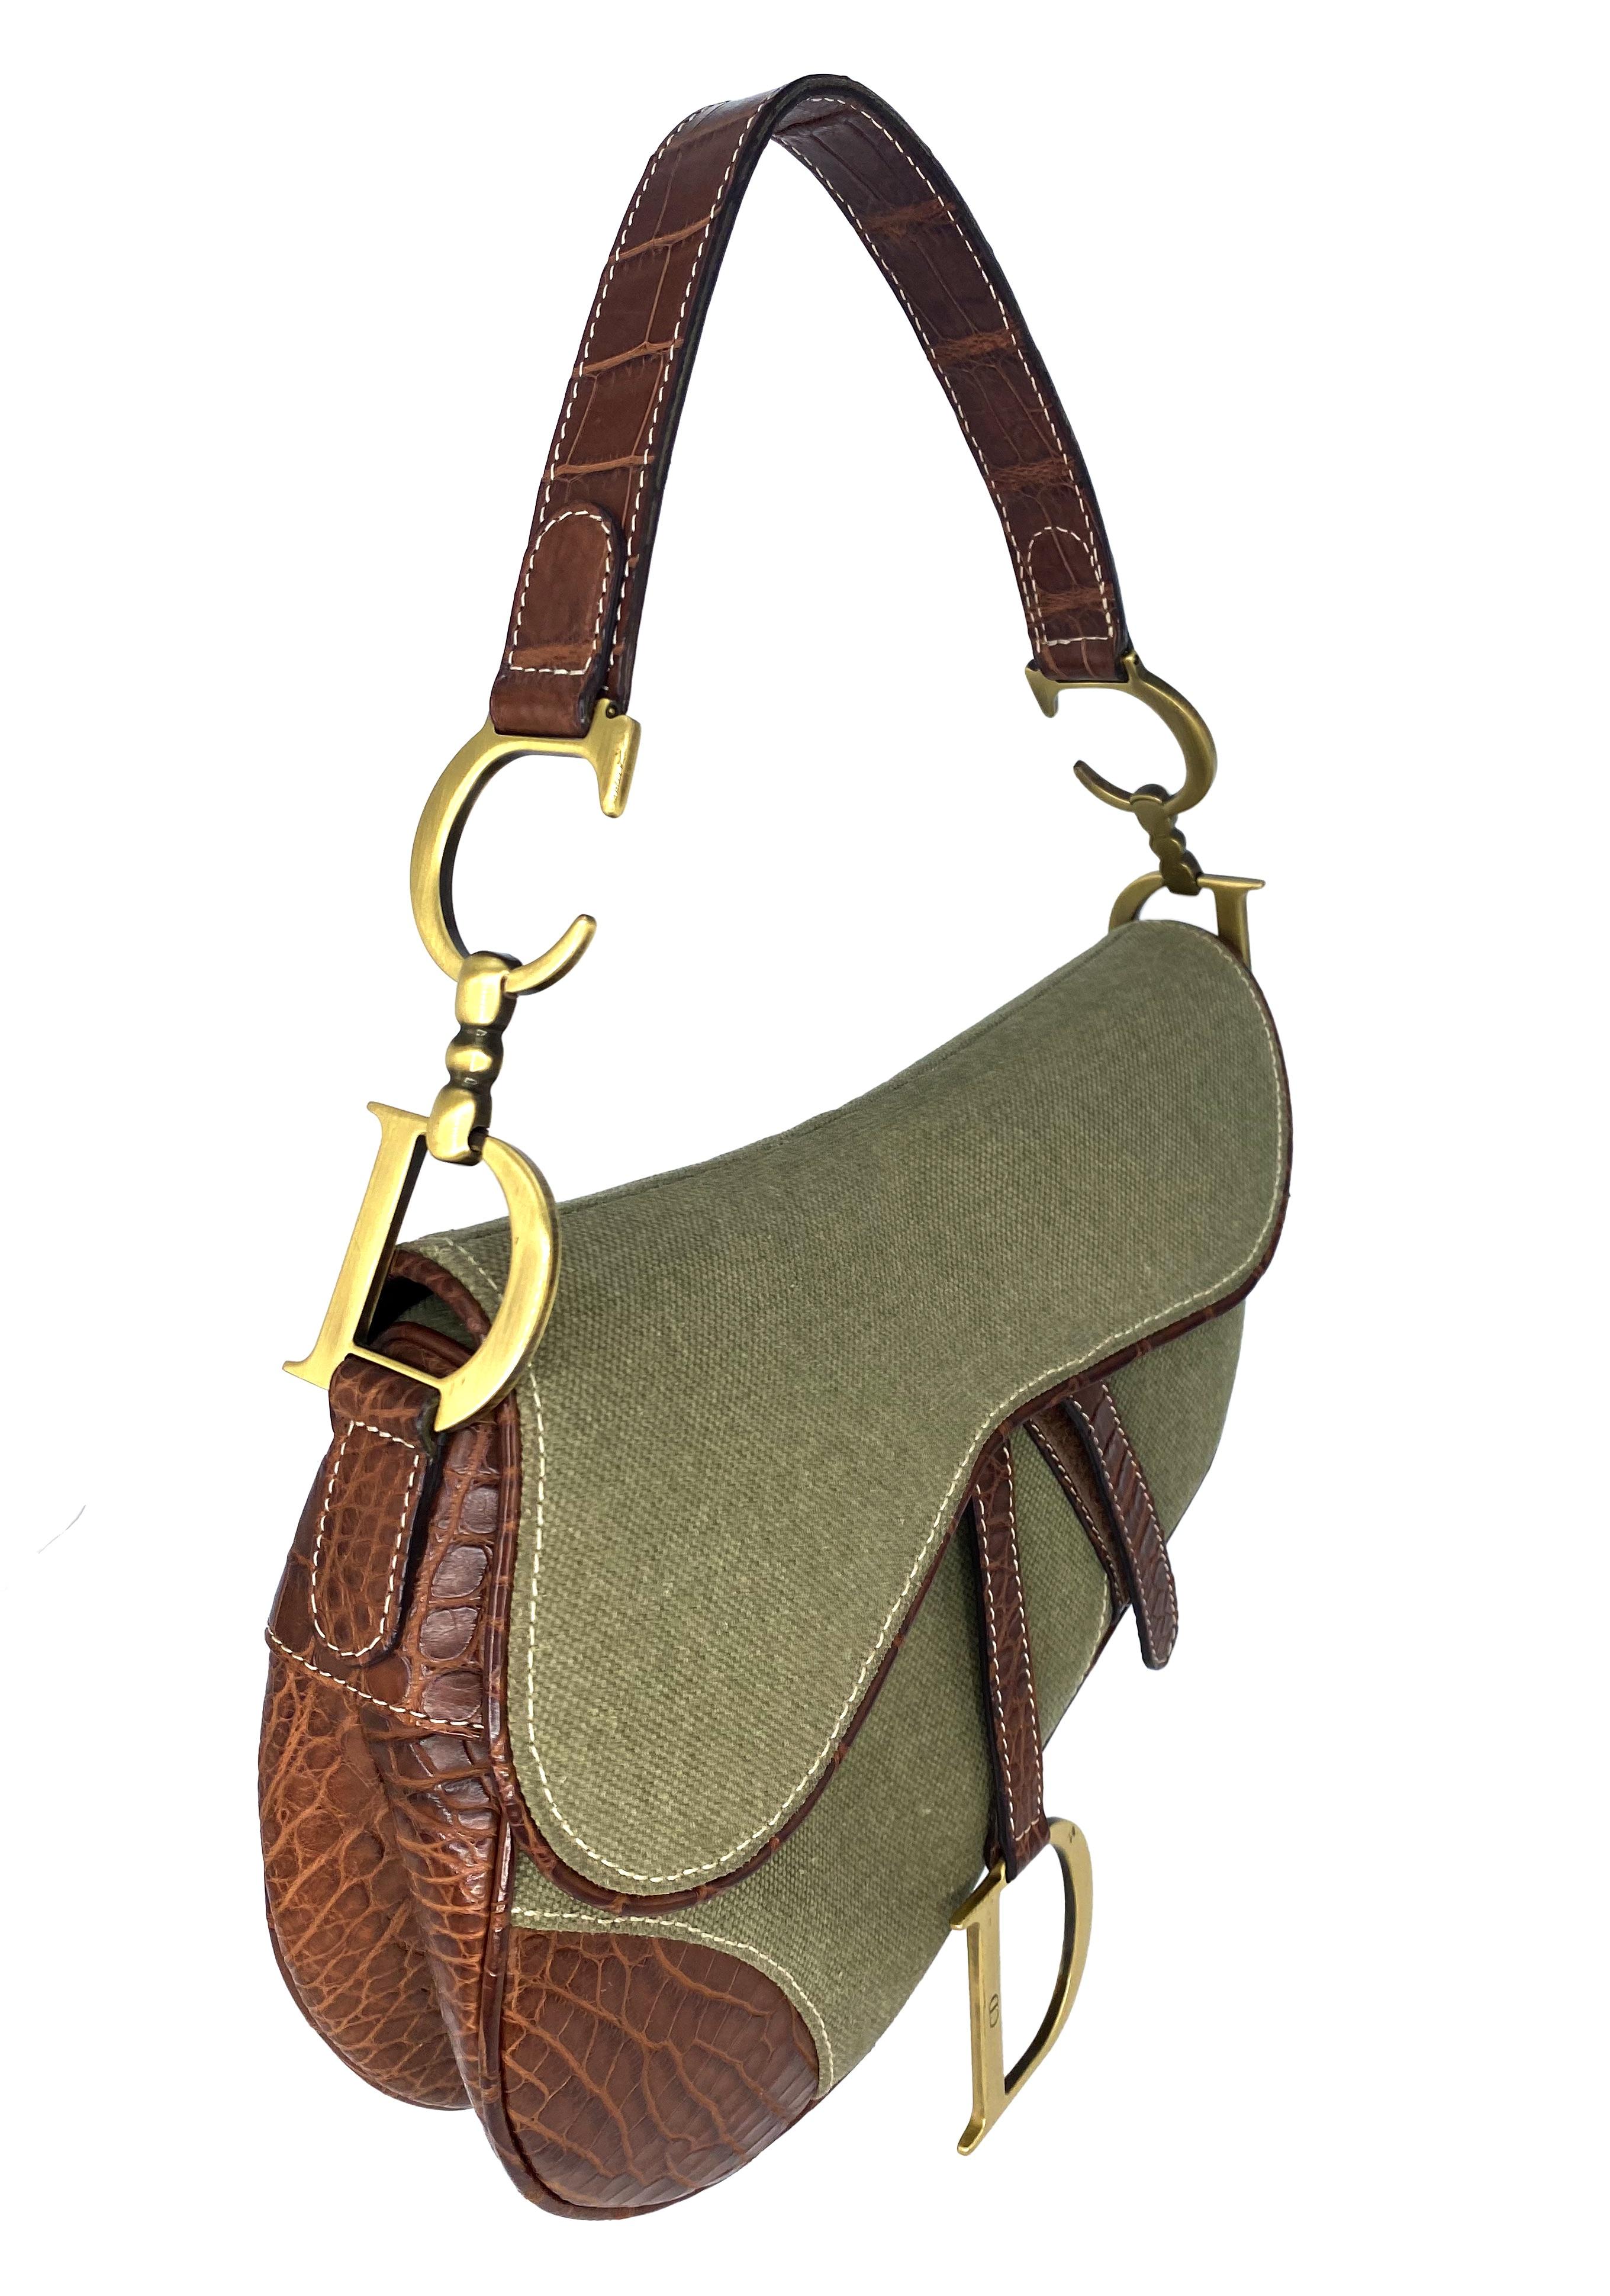 TheRealList presents: a rare variation of the iconic saddle bag designed by John Galliano for Christian Dior constructed of brown crocodile/alligator embossed leather and olive green canvas. The saddle bag first debuted in 1999 for Dior's